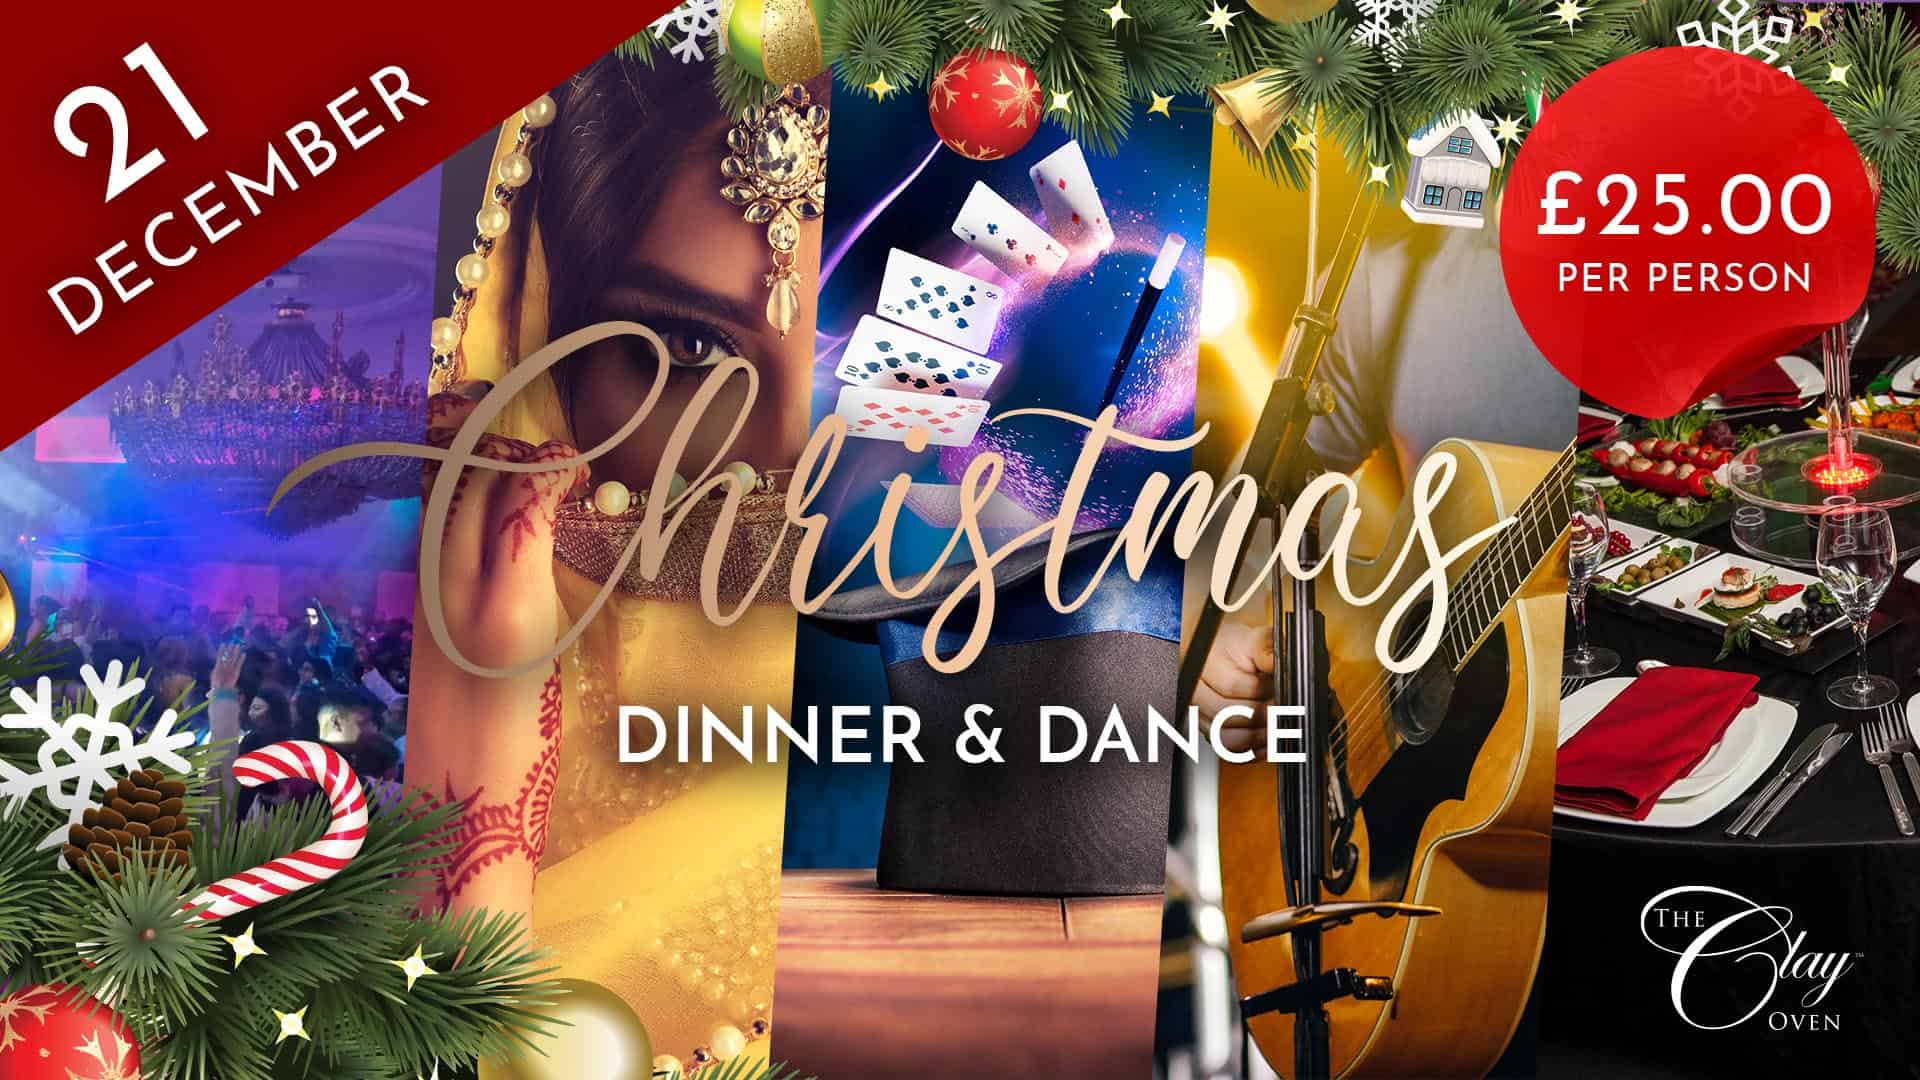 Celebrate the festive season with a Christmas dinner and dance.